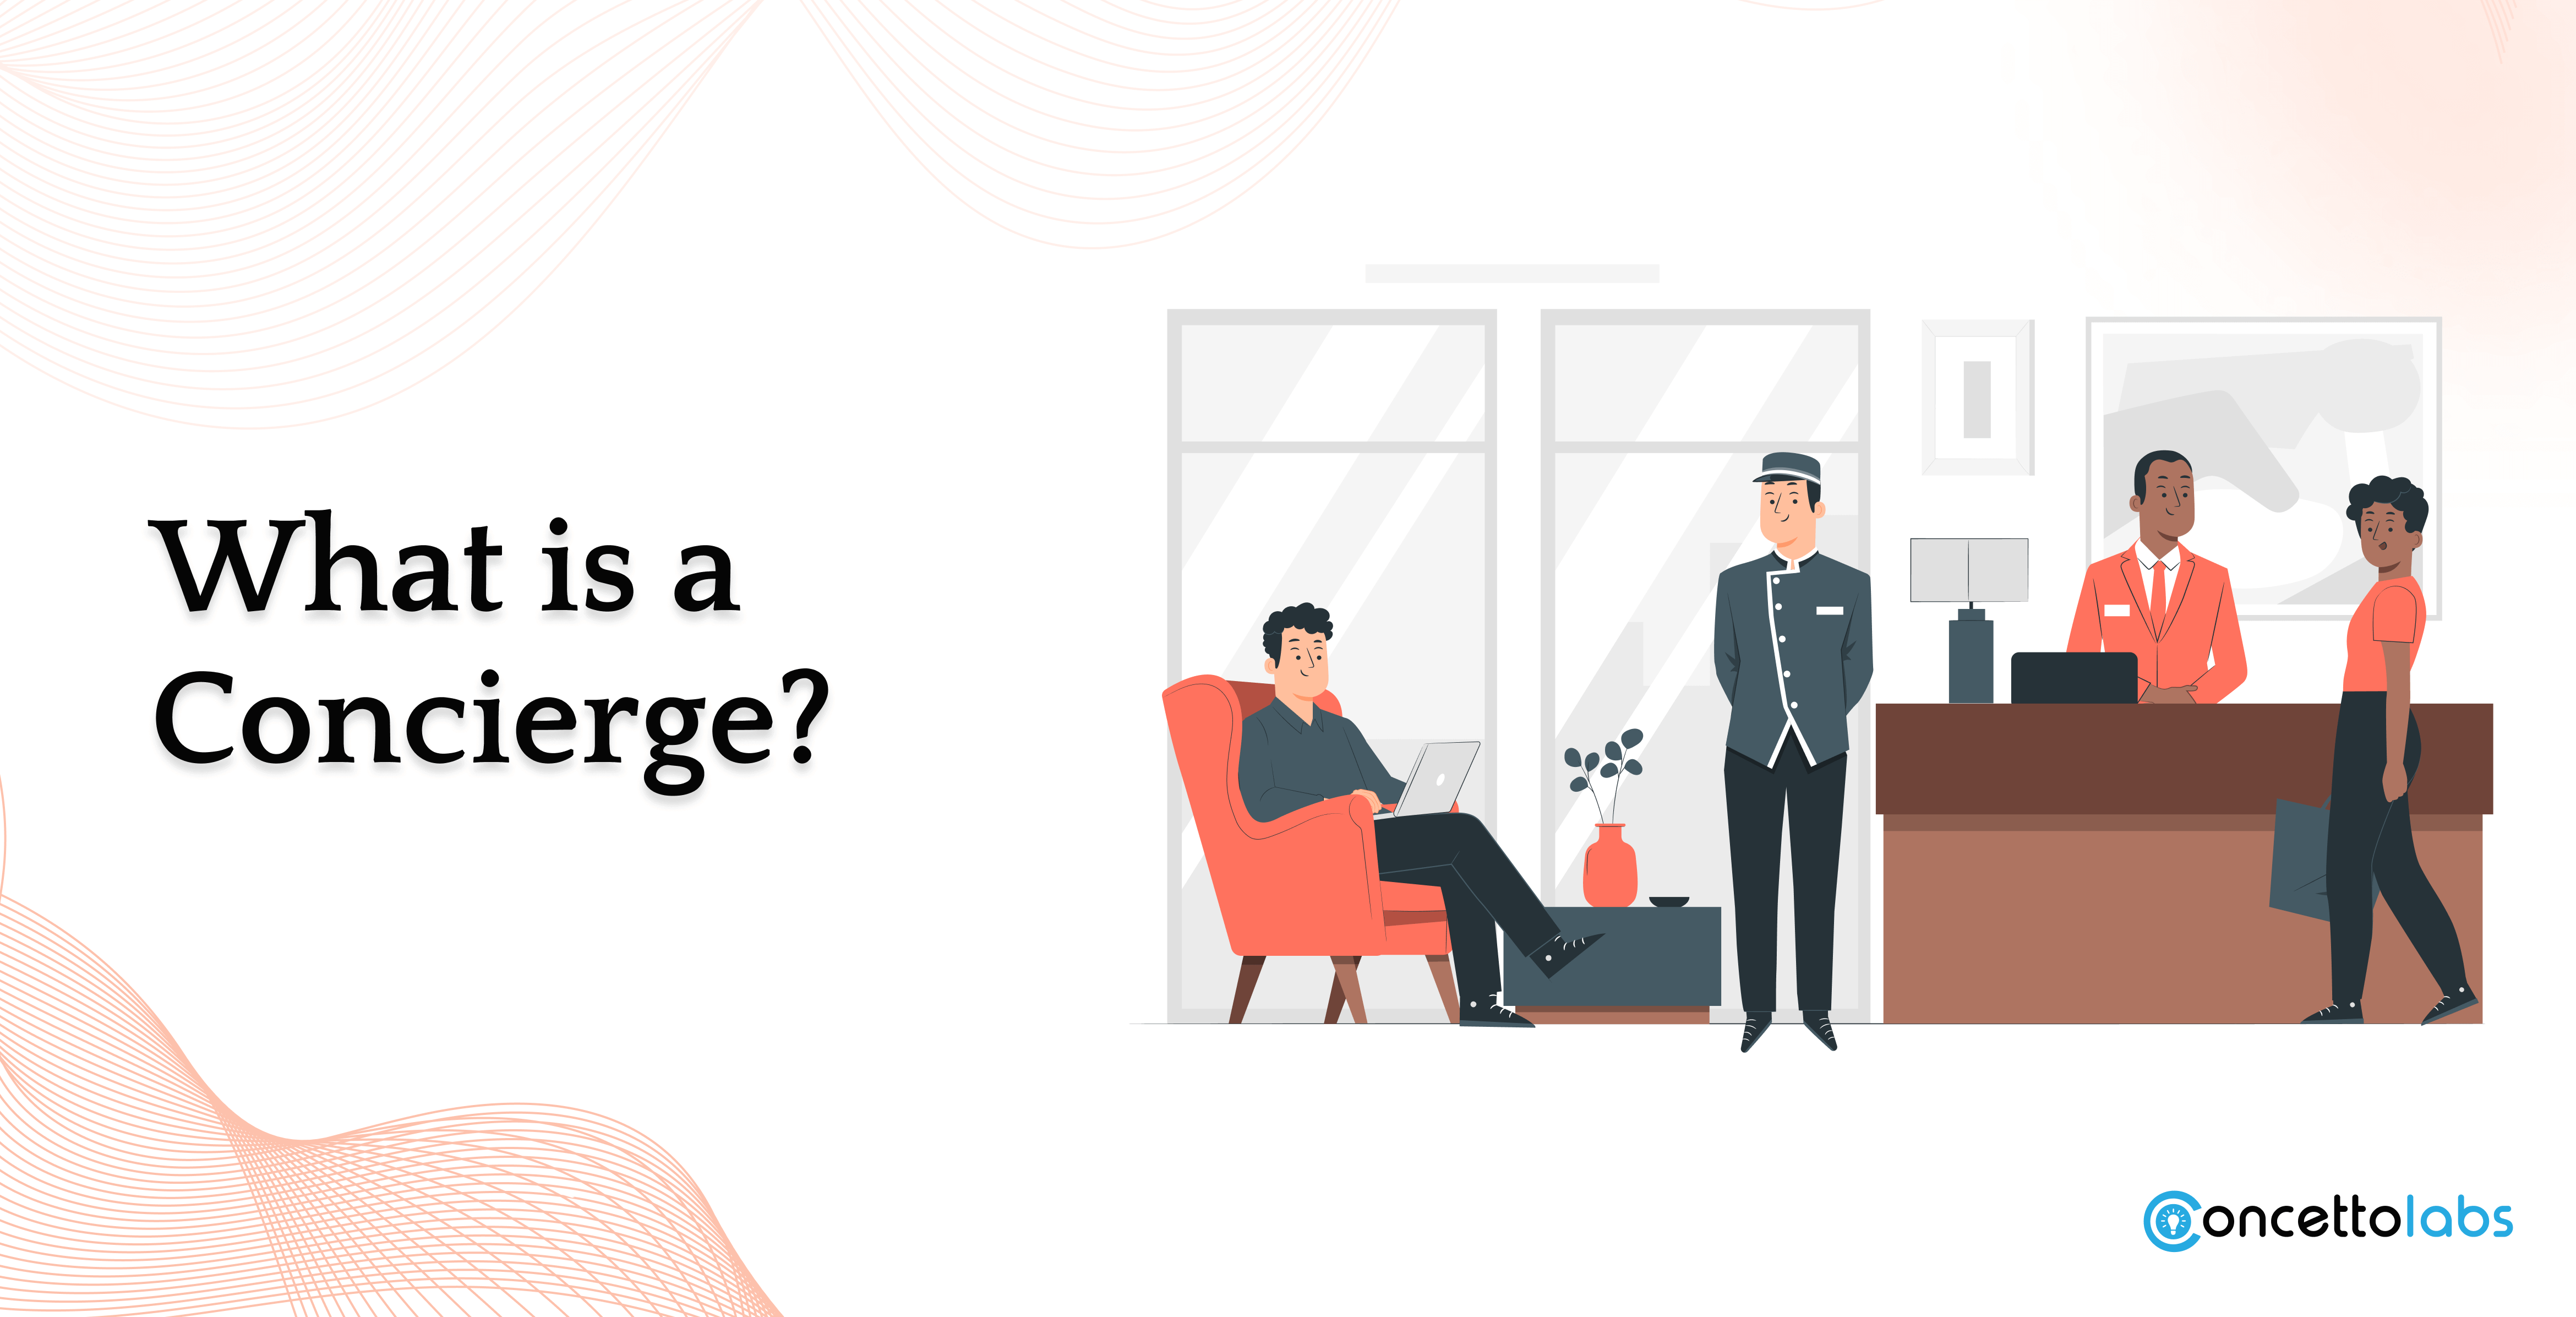 What is a Concierge?